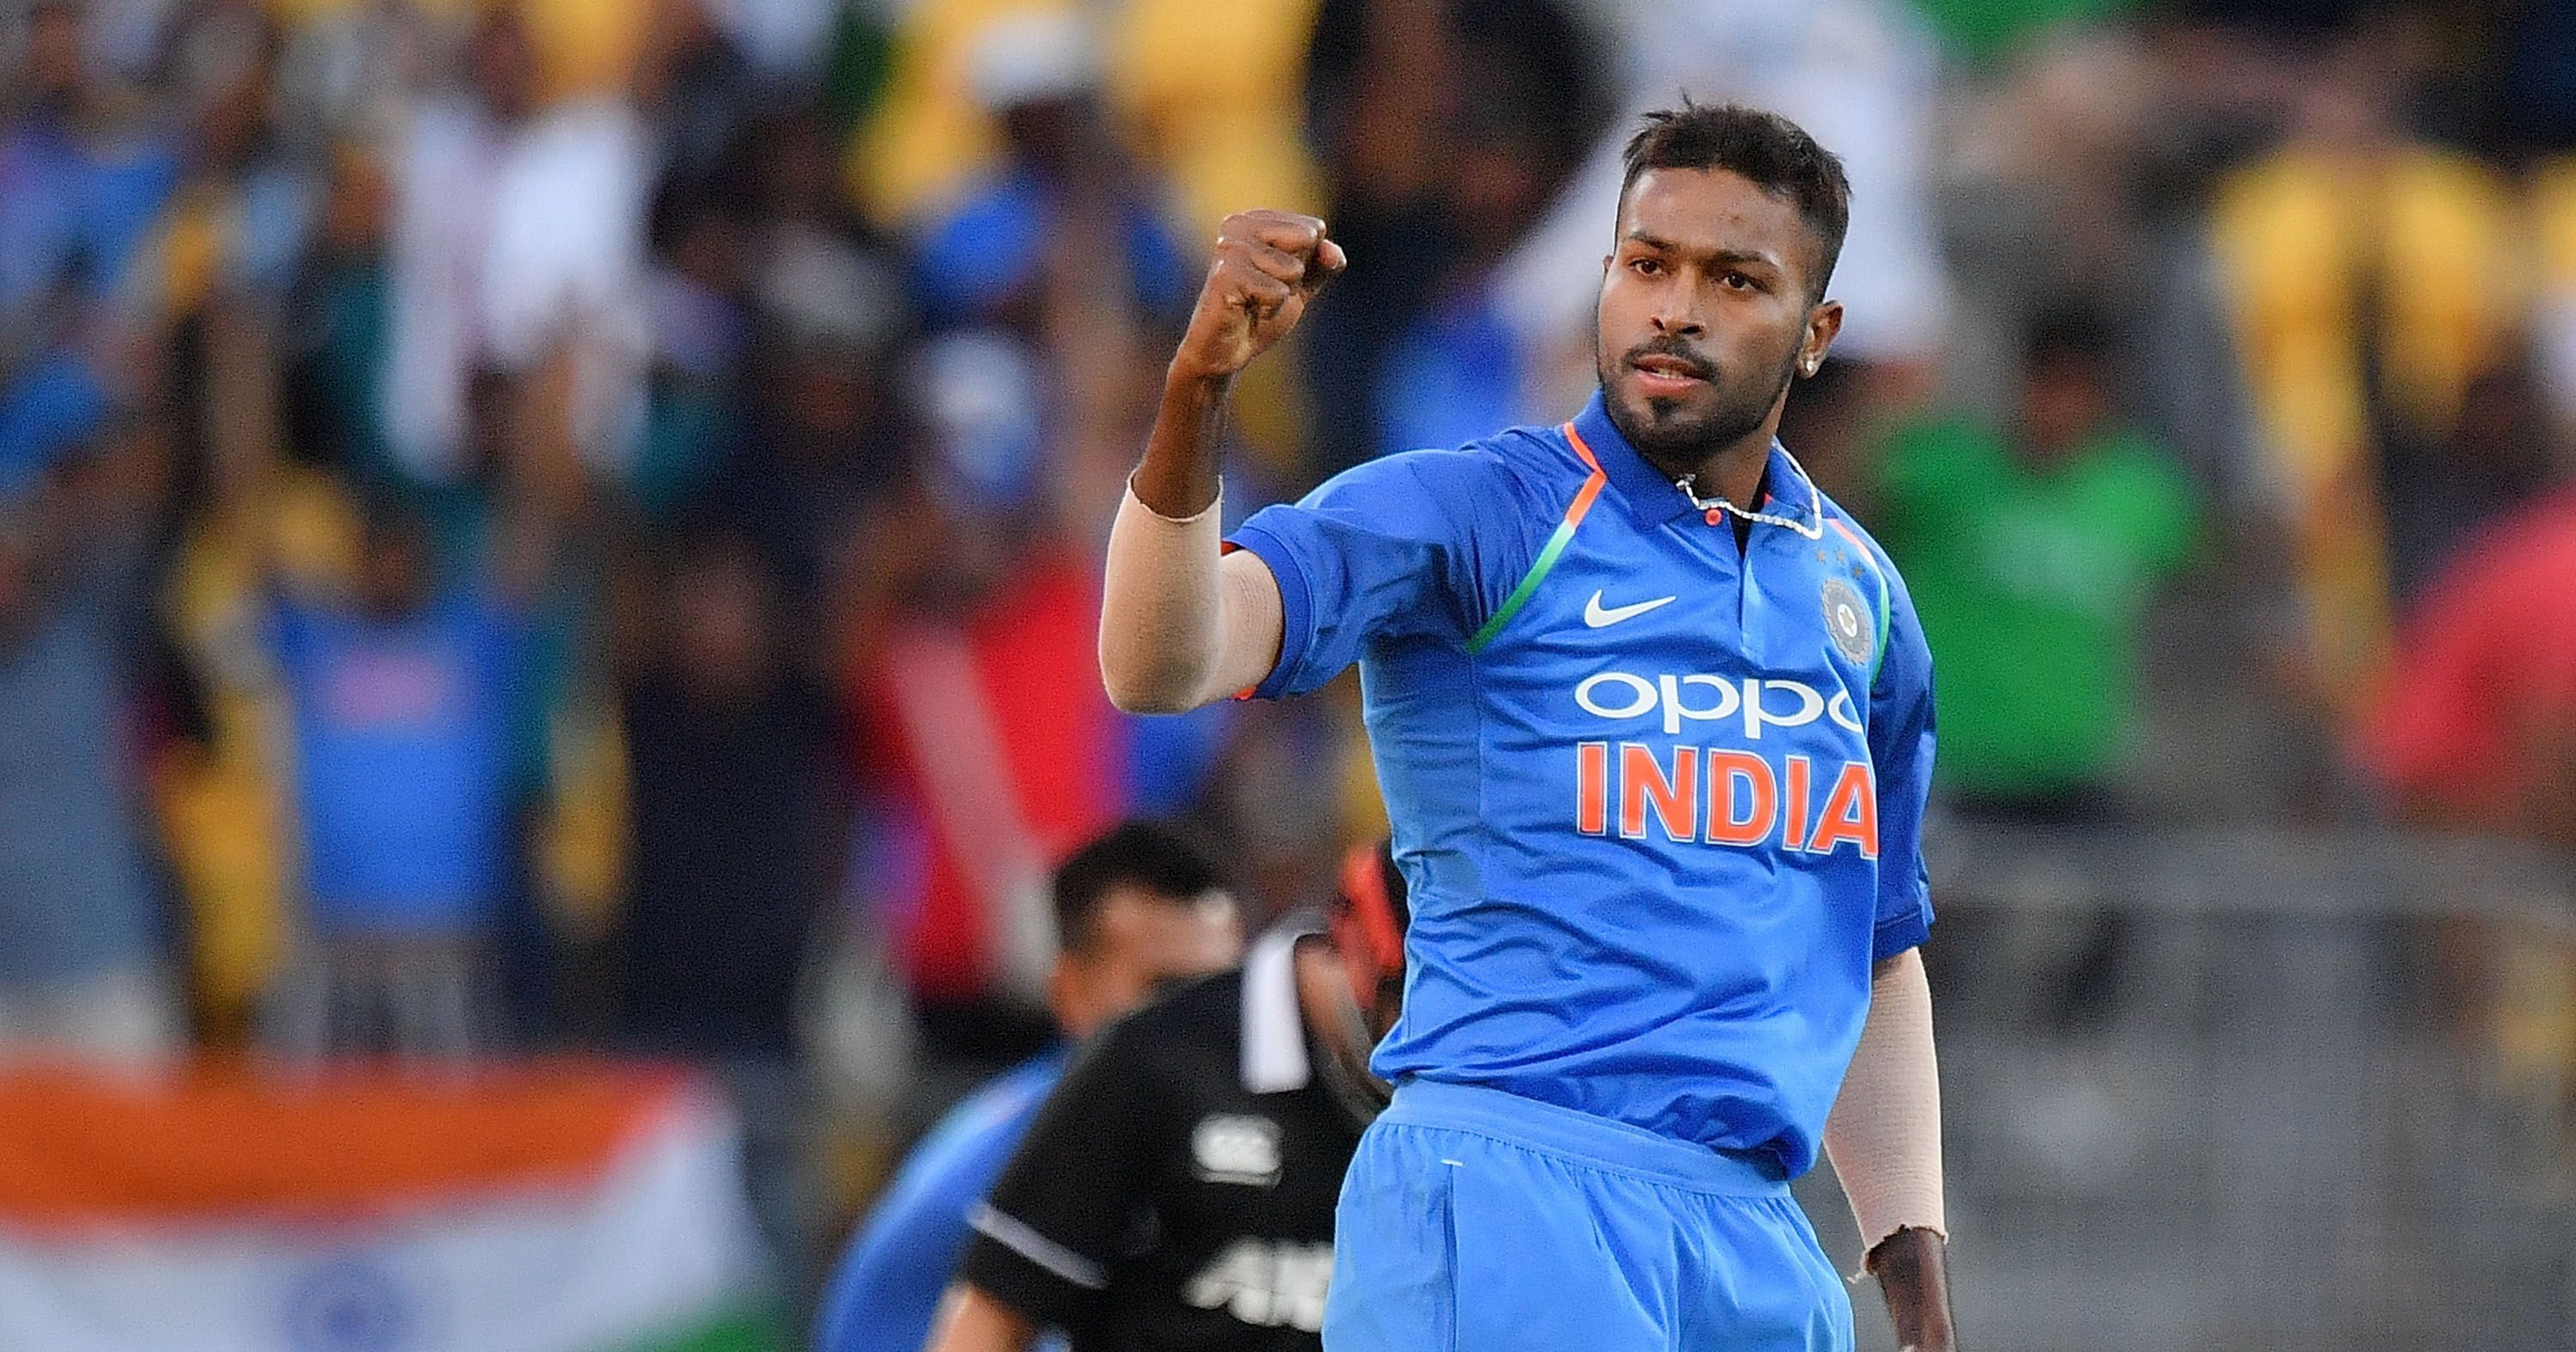 All Eyes On Hardik Pandya As He Tries To Make A Lasting Impression By